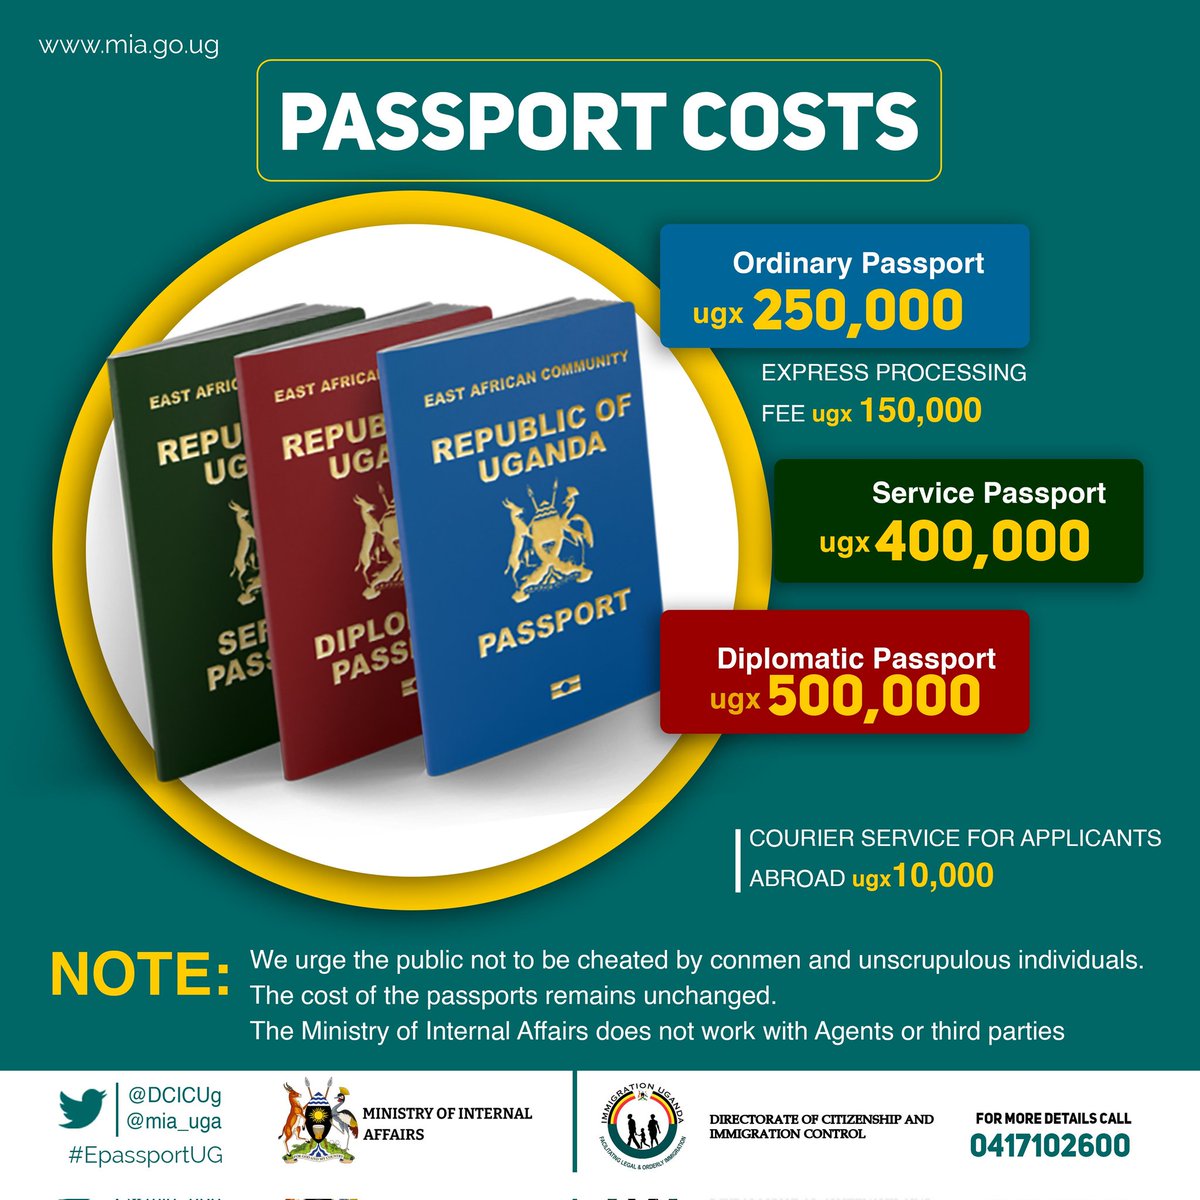 These are the fees for passports: Ordinary passports cost 250,000 UGX. For express processing, an extra 150,000 UGX is paid separately. All money is paid in a bank. It takes 10 working days to process a passport with the regular fees, (Ugx 250,000) and Express-2 working days